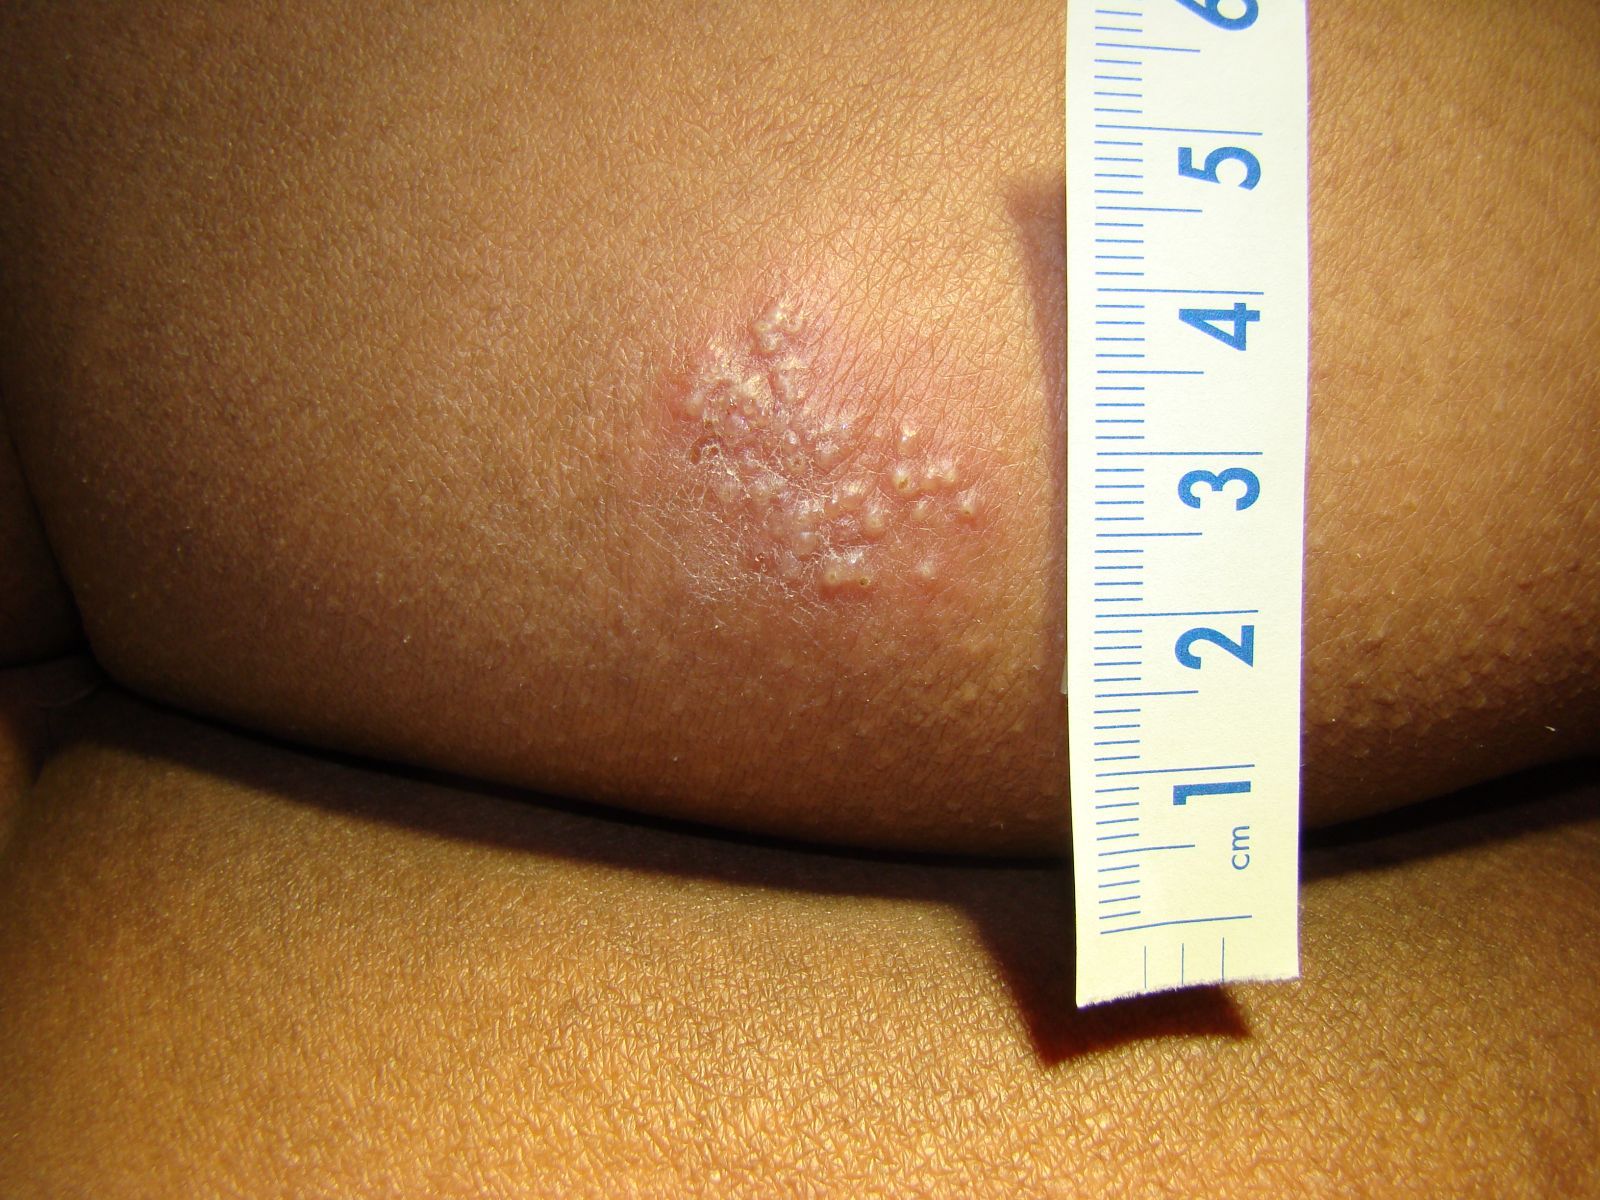 Painful Buttock Lesion In A Pregnant Woman